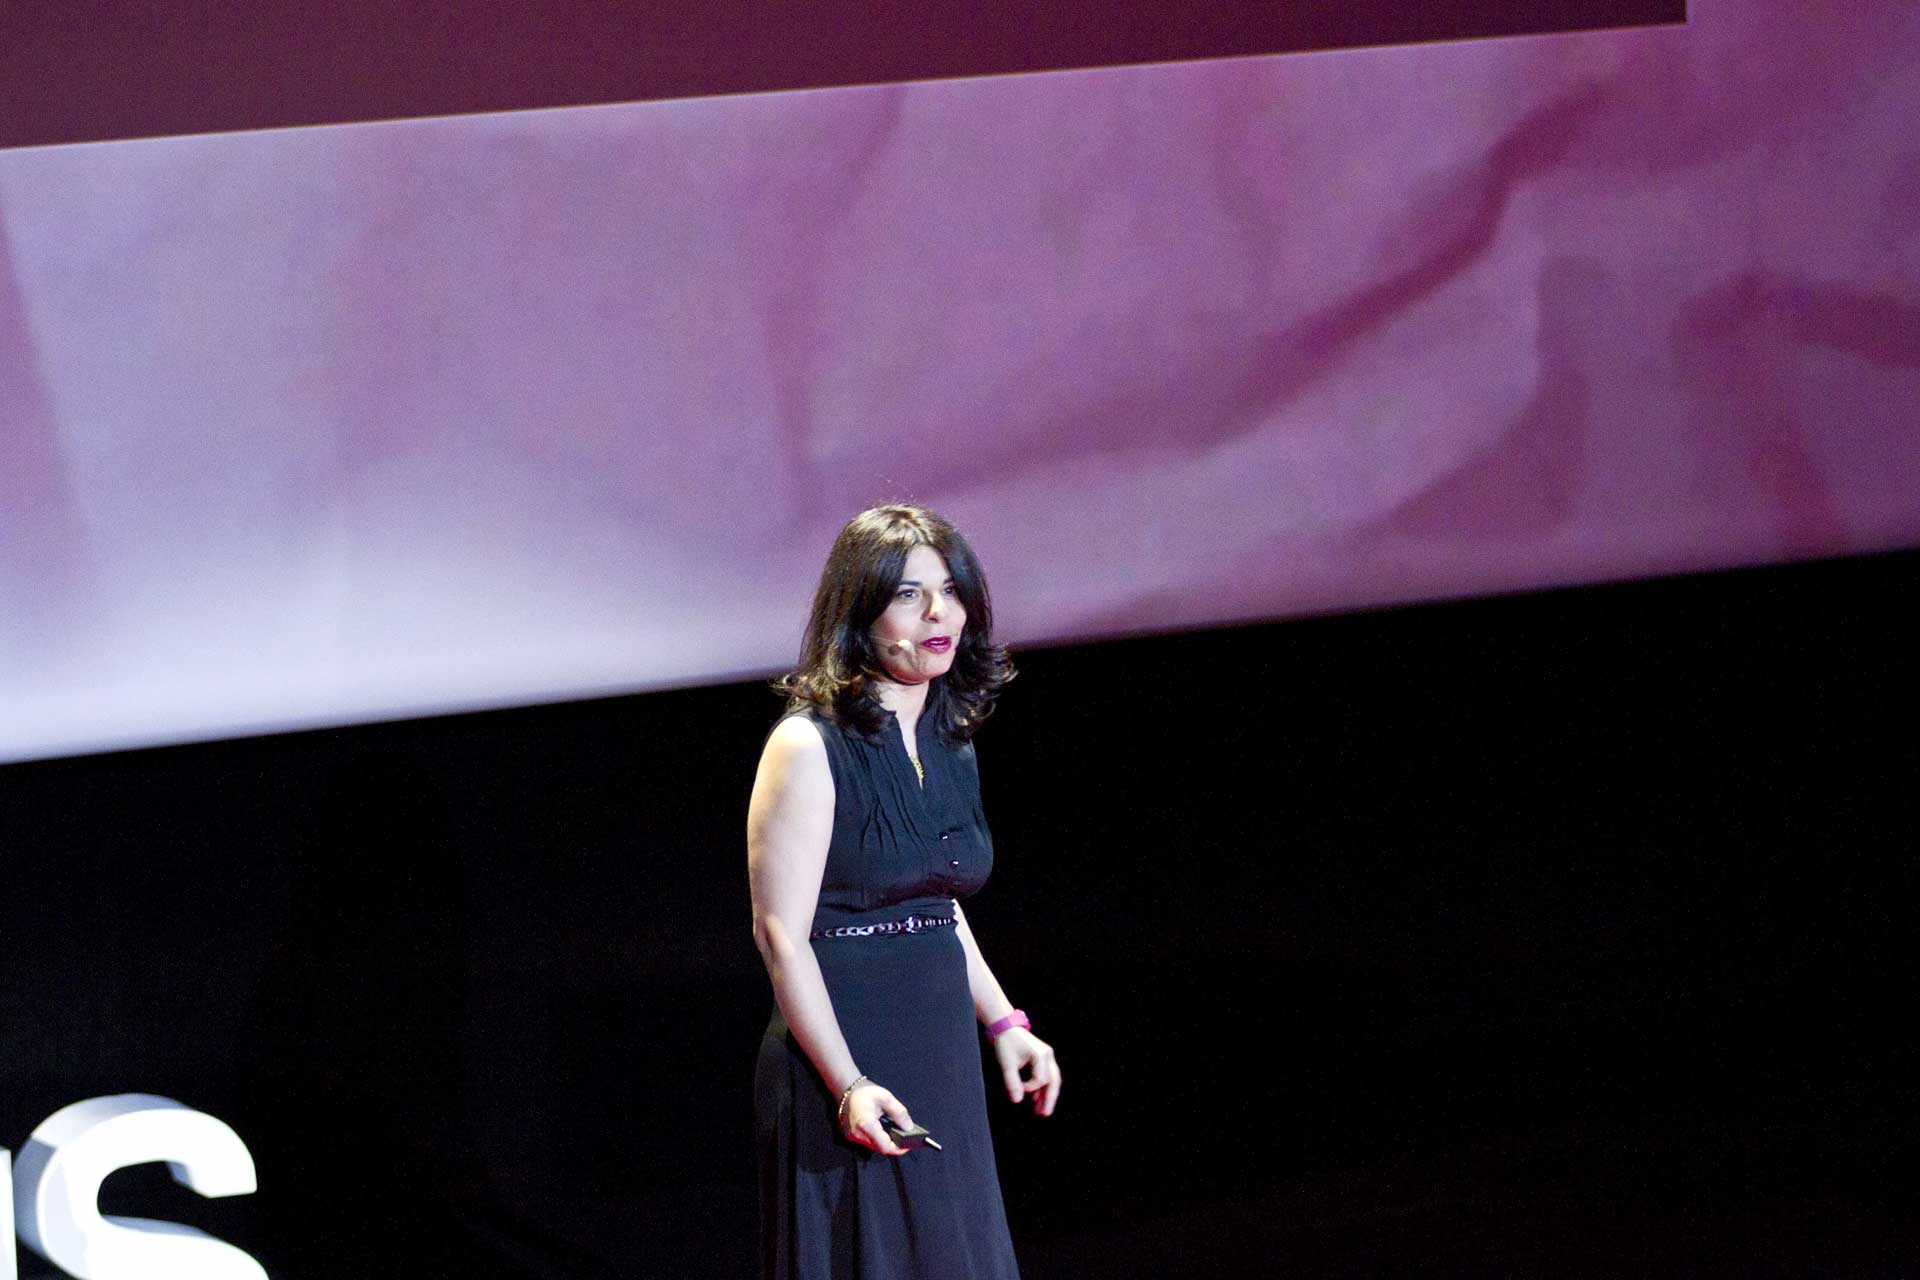 conference-TEDxParis-2013-17.jpg